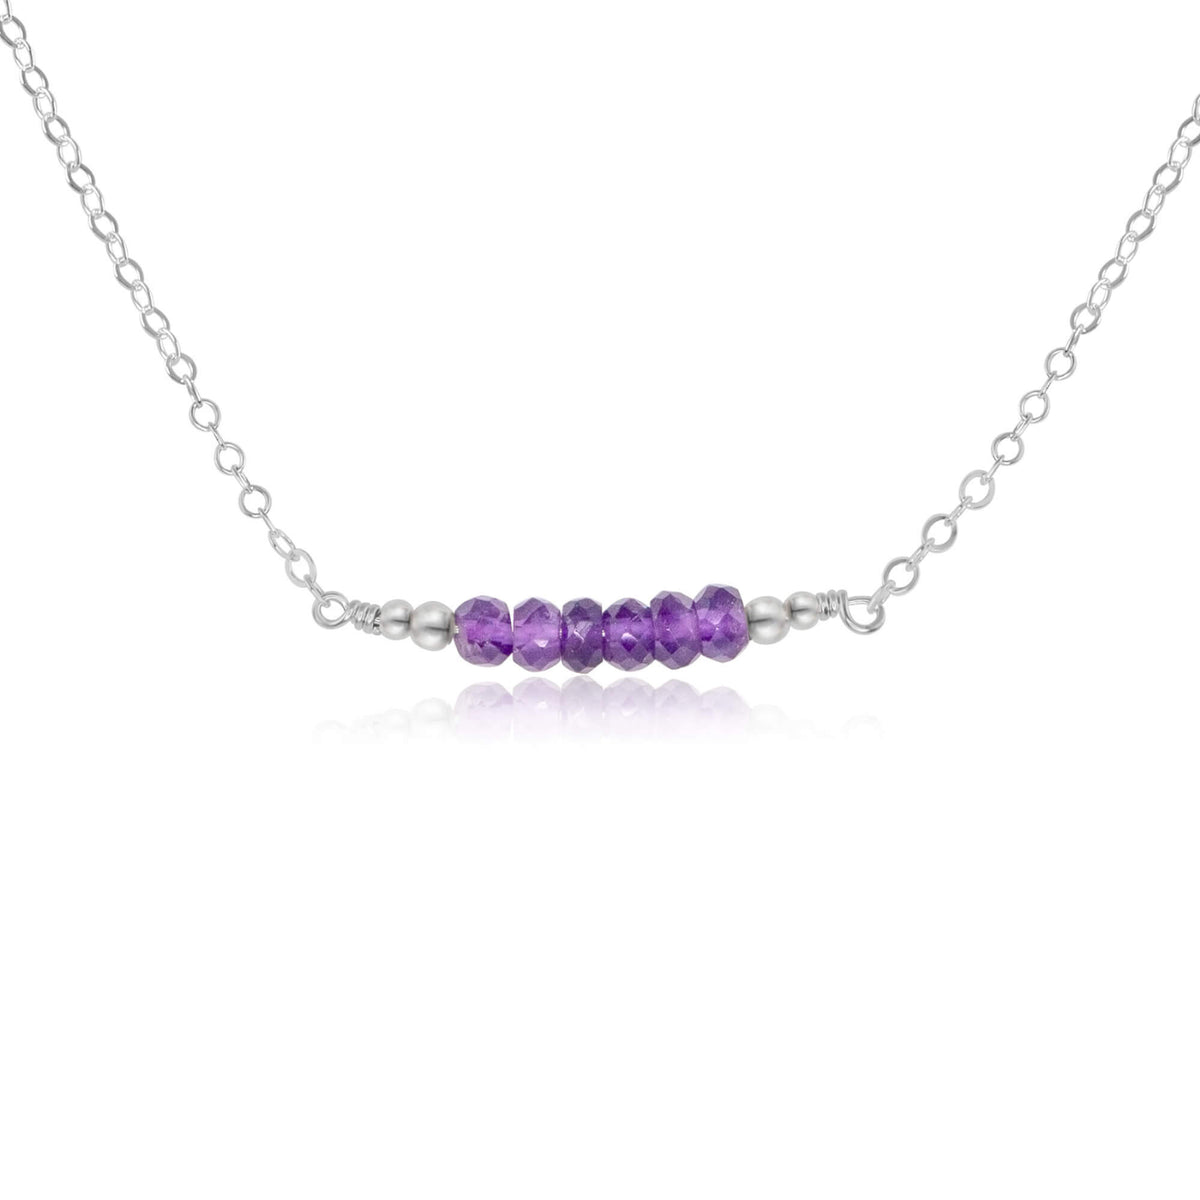 Faceted Bead Bar Necklace - Amethyst - Sterling Silver - Luna Tide Handmade Jewellery